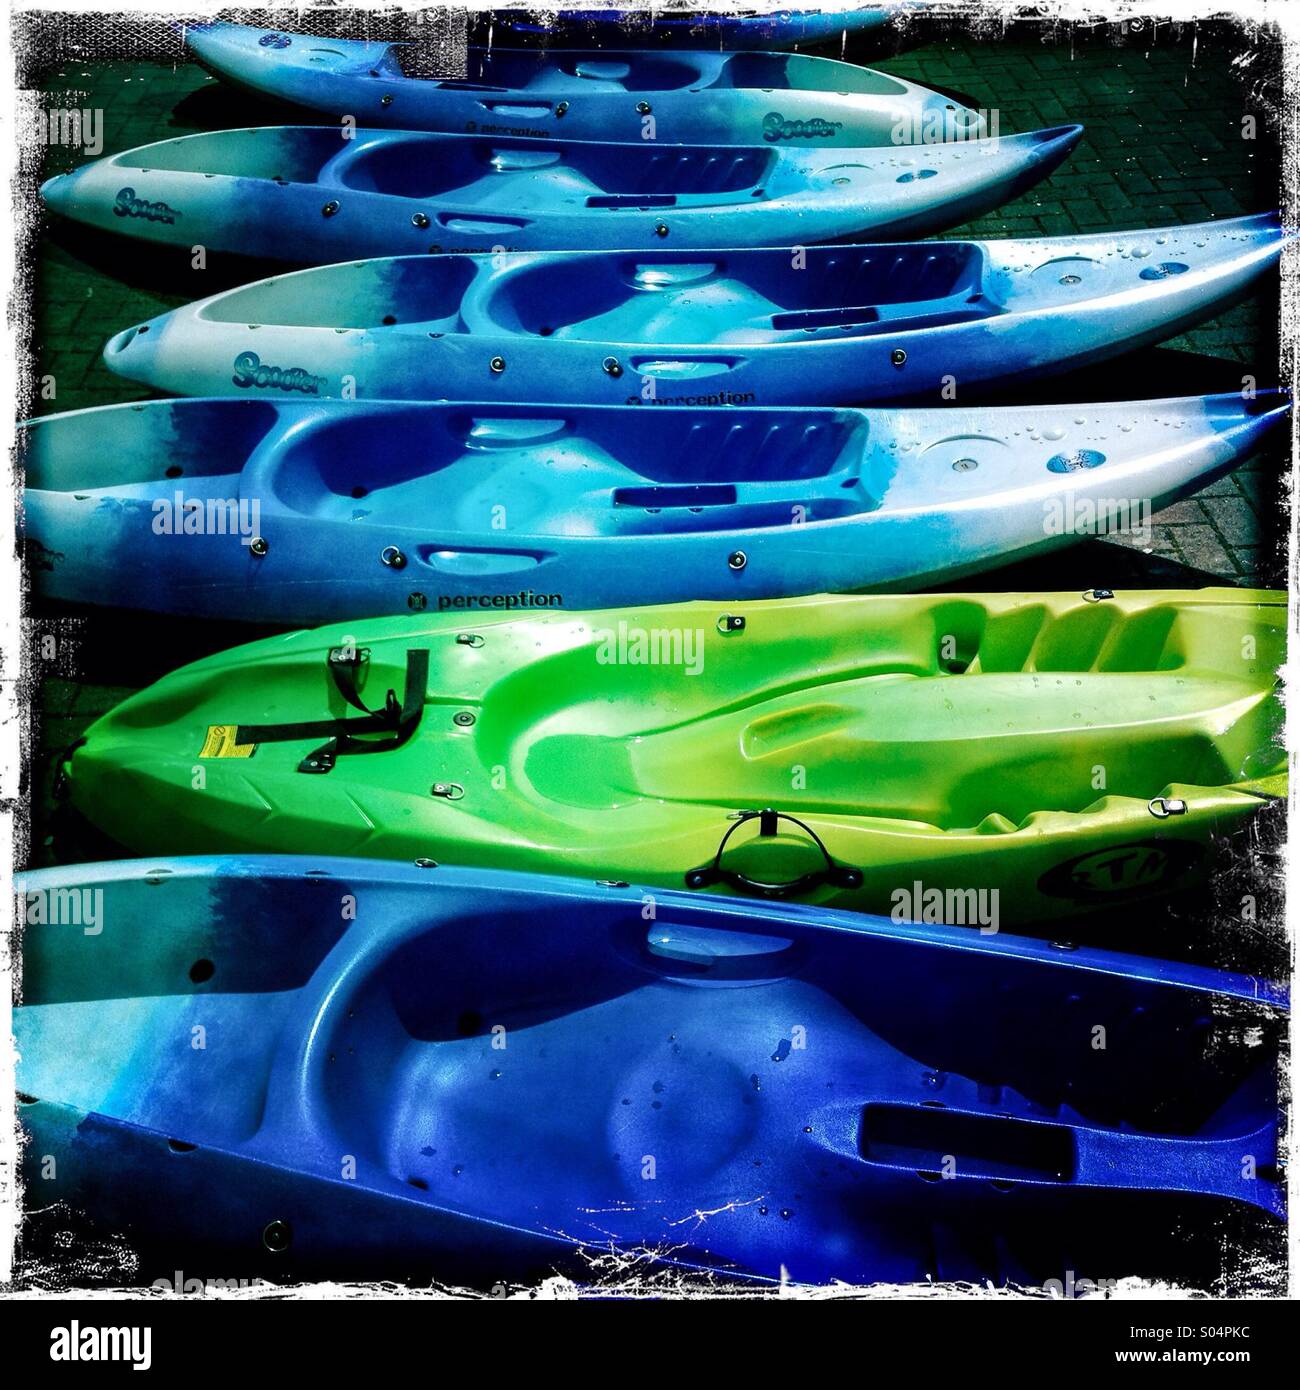 Blue and yellow kayaks on the shoreline. Hipstamatic jagged edge photo. Saturated colours. Stock Photo